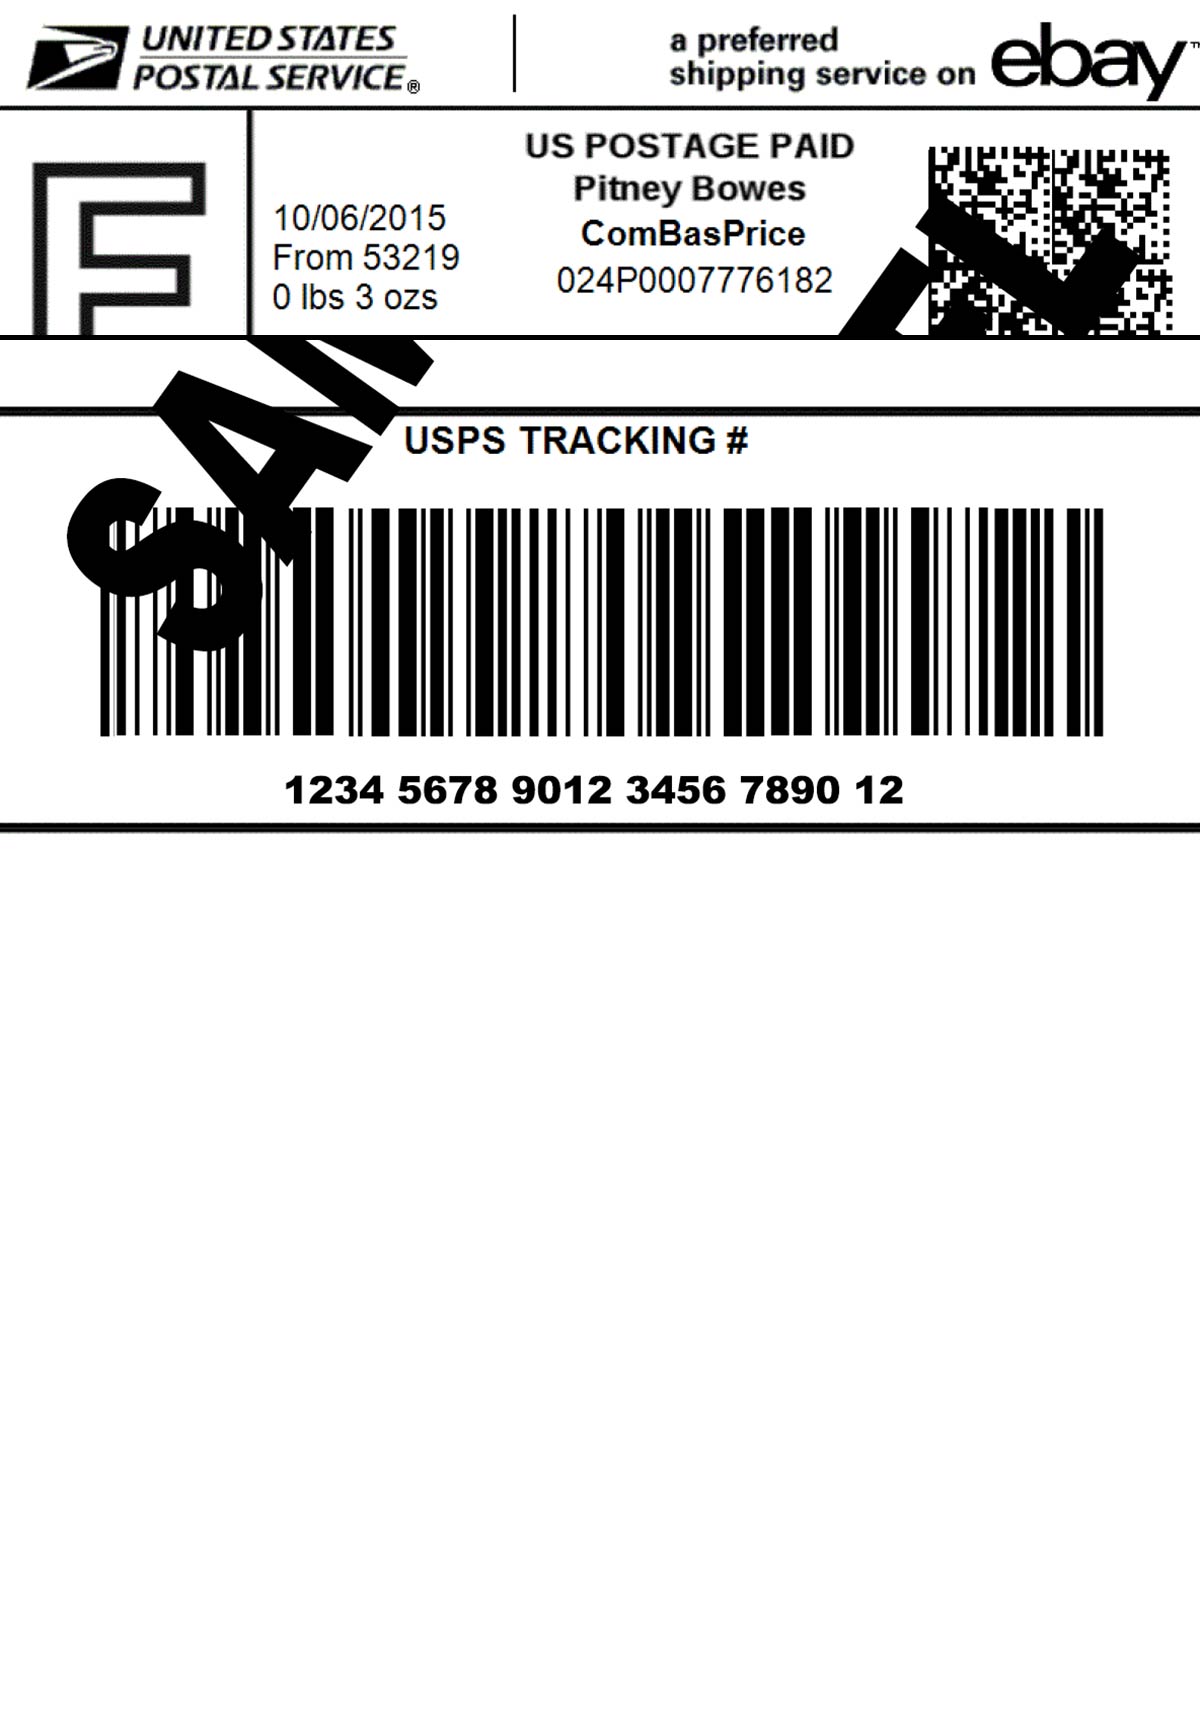 Thermal Printer Test - Shipping Label - Slipping Belts.